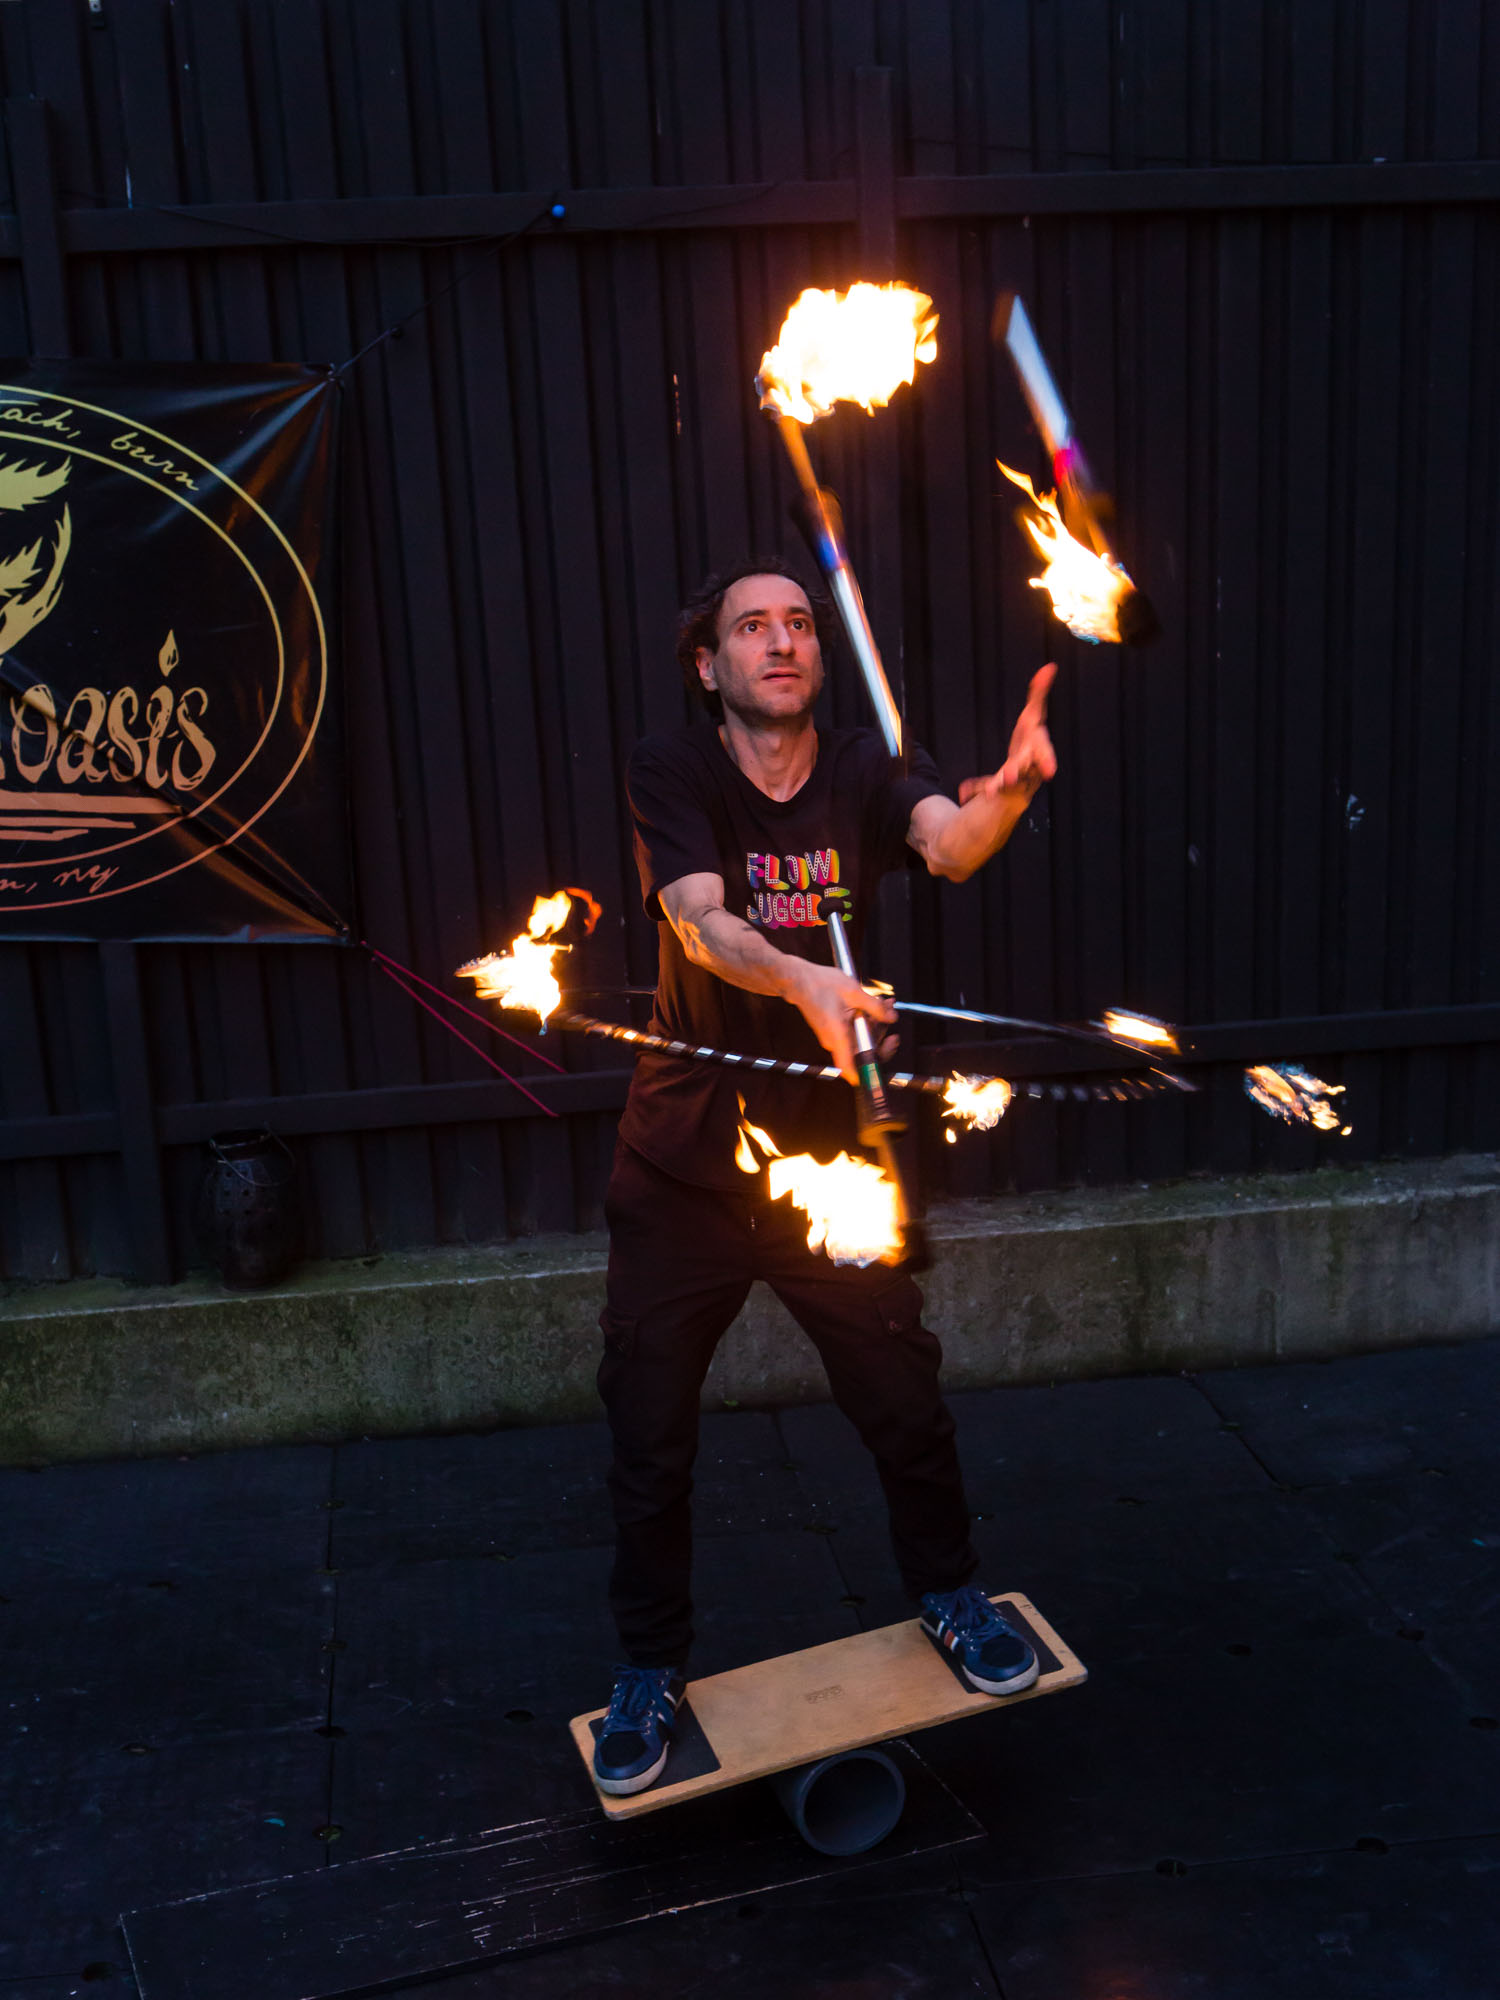 Martin Kuborn juggling flaming torches while twirling a hula-hoop with six flaming torches around its perimeter, all while balanced on a balance board at The Floasis.